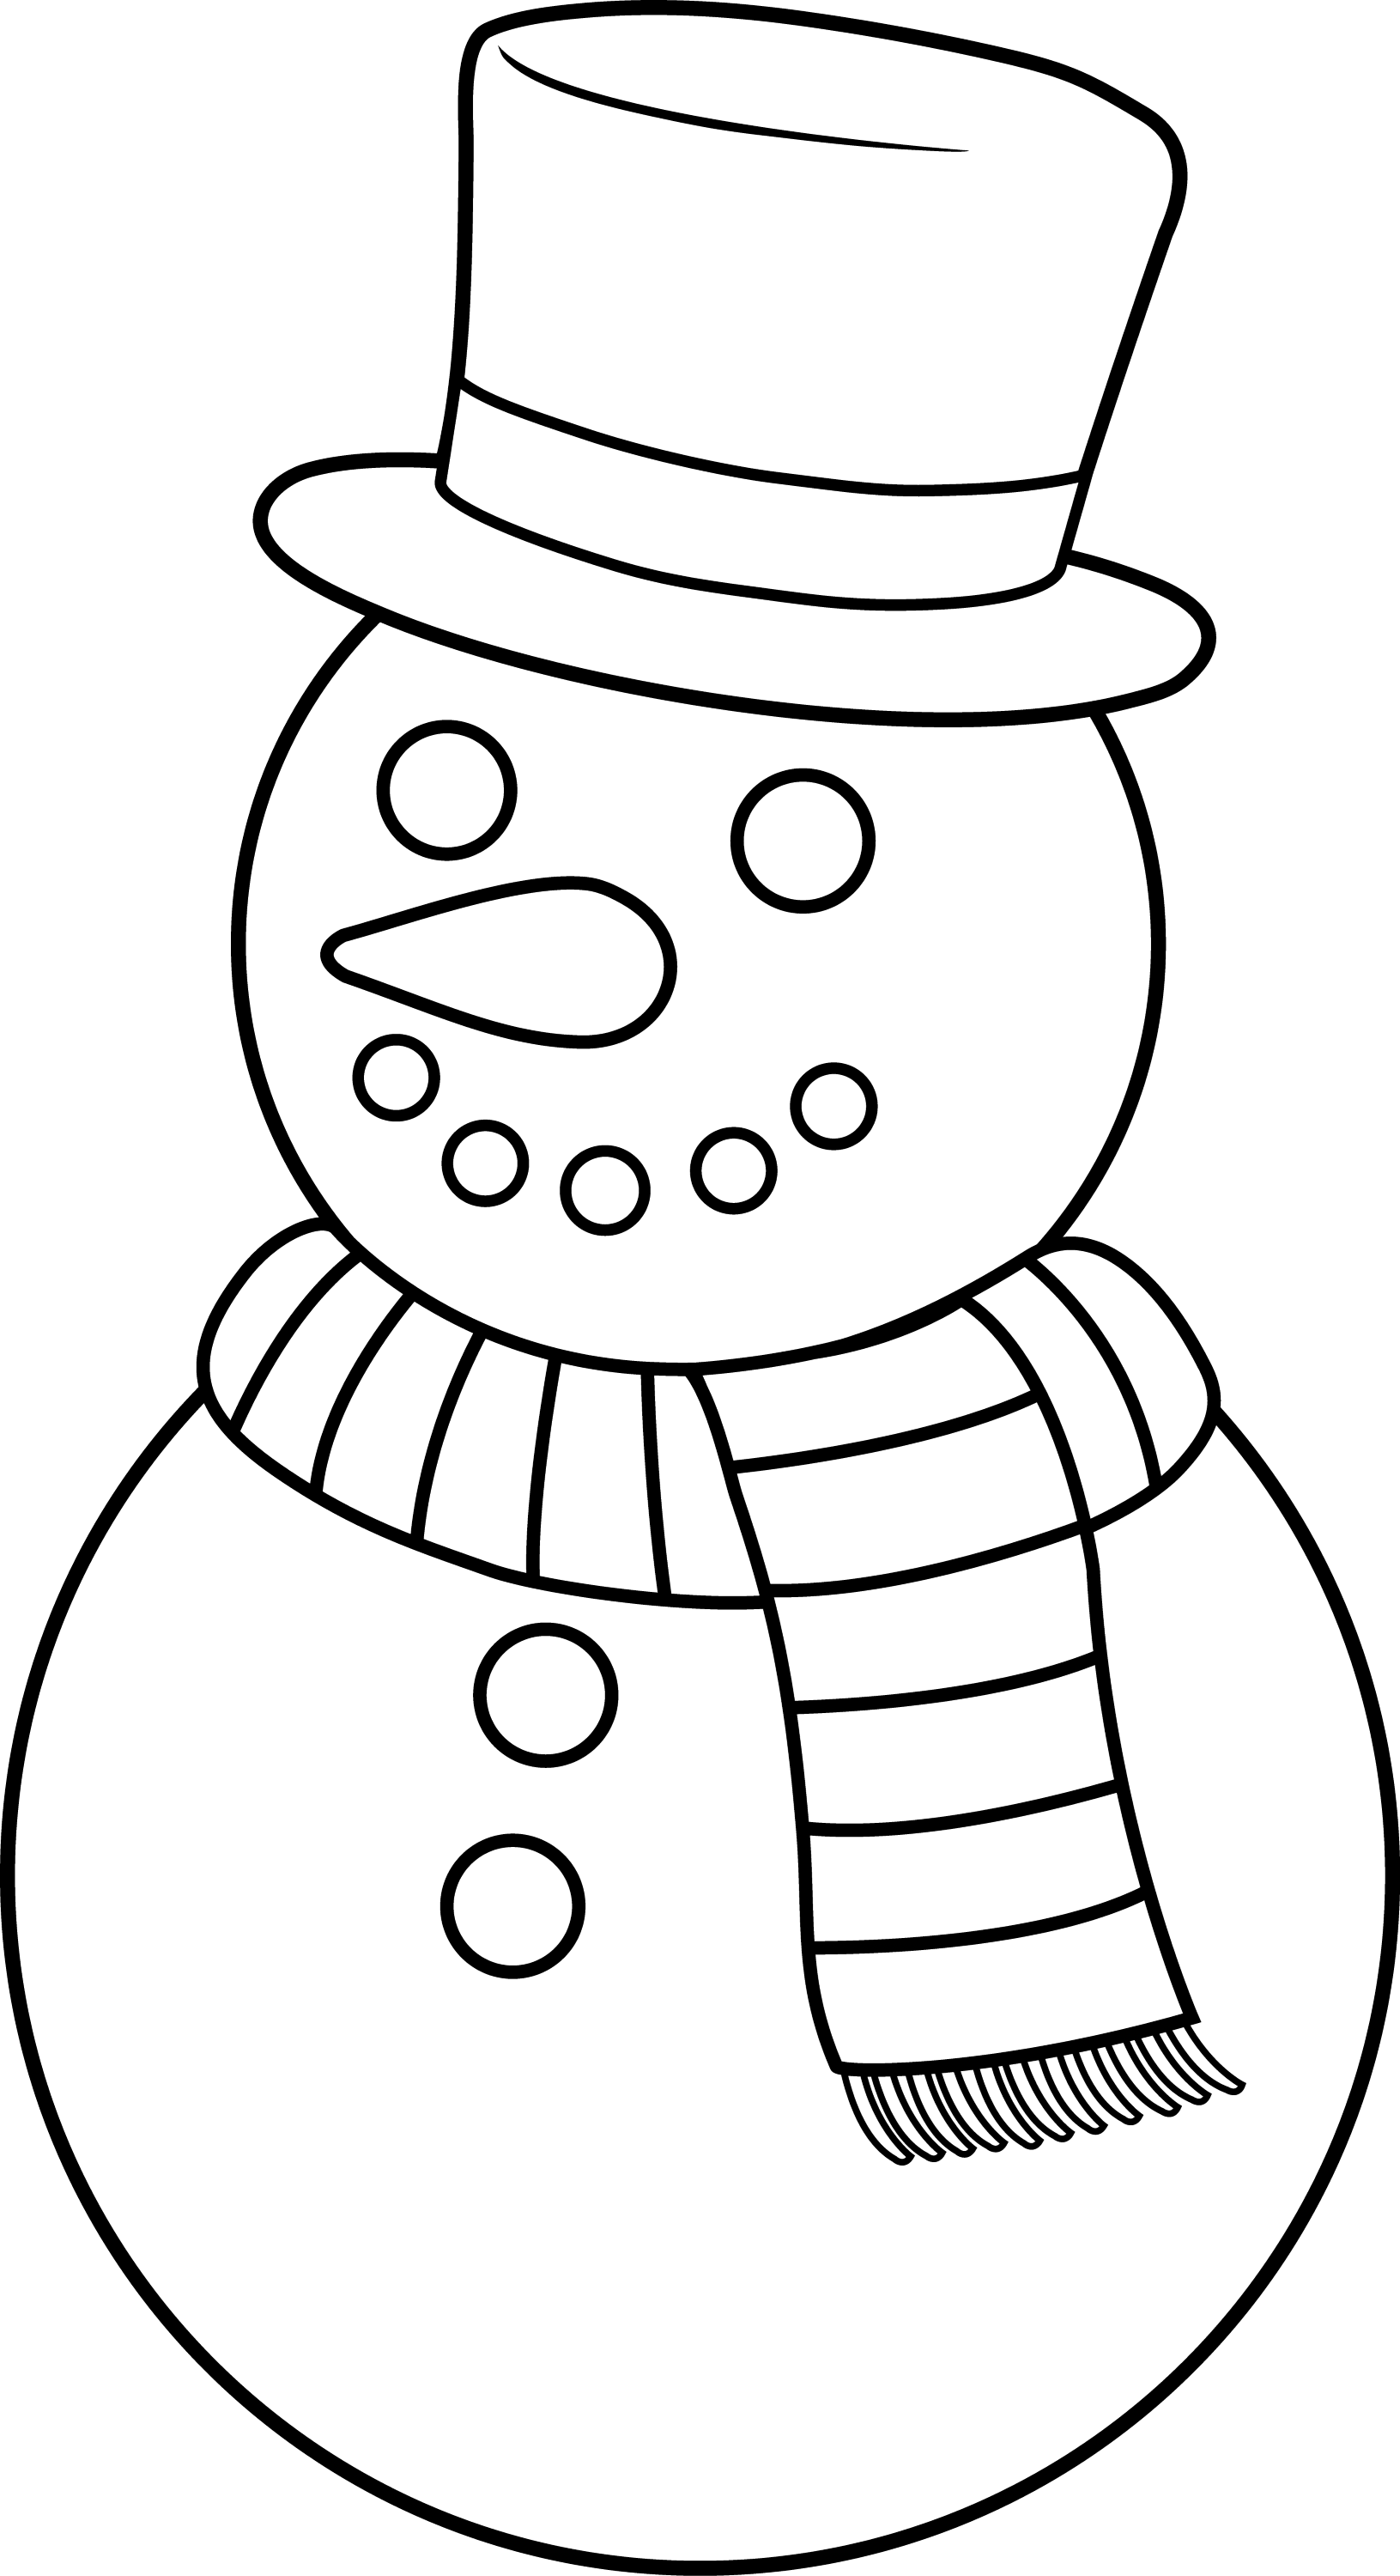 664 Cartoon Blank Snowman Coloring Pages with Animal character